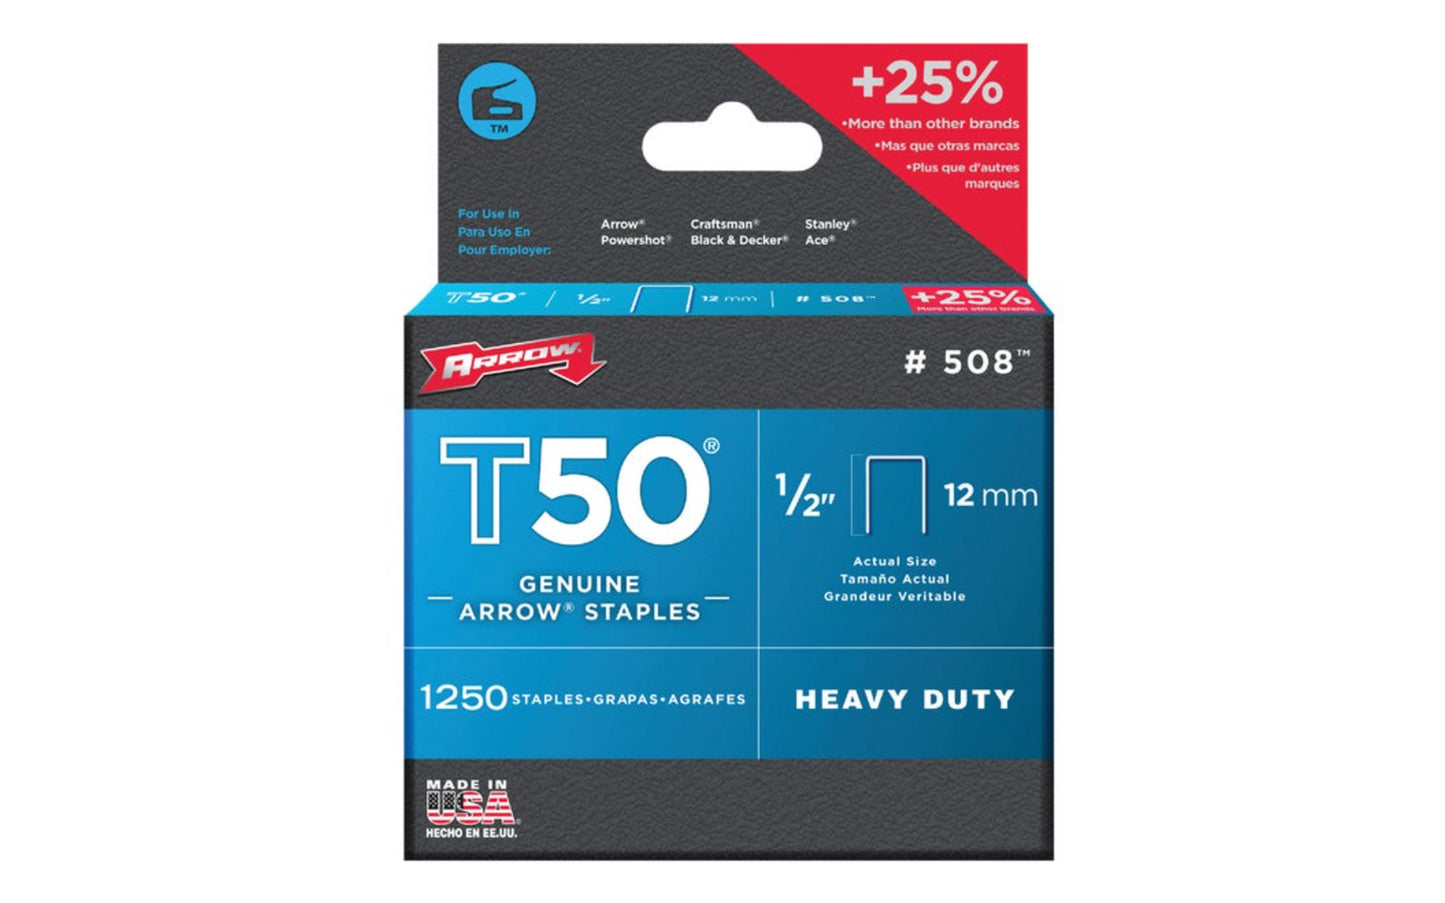 Arrow T50 Heavy Duty 1/2" Staples - 1250 PK. Model 508. Arrow Fastener T50 staples are the world’s best-selling heavy duty staple platform & have exceptional holding power. Used for all heavy duty stapling applications. Ideal for indoor applications. 1/2" (12 mm). Item No. 50824. 1250 staples in pack. 079055500124